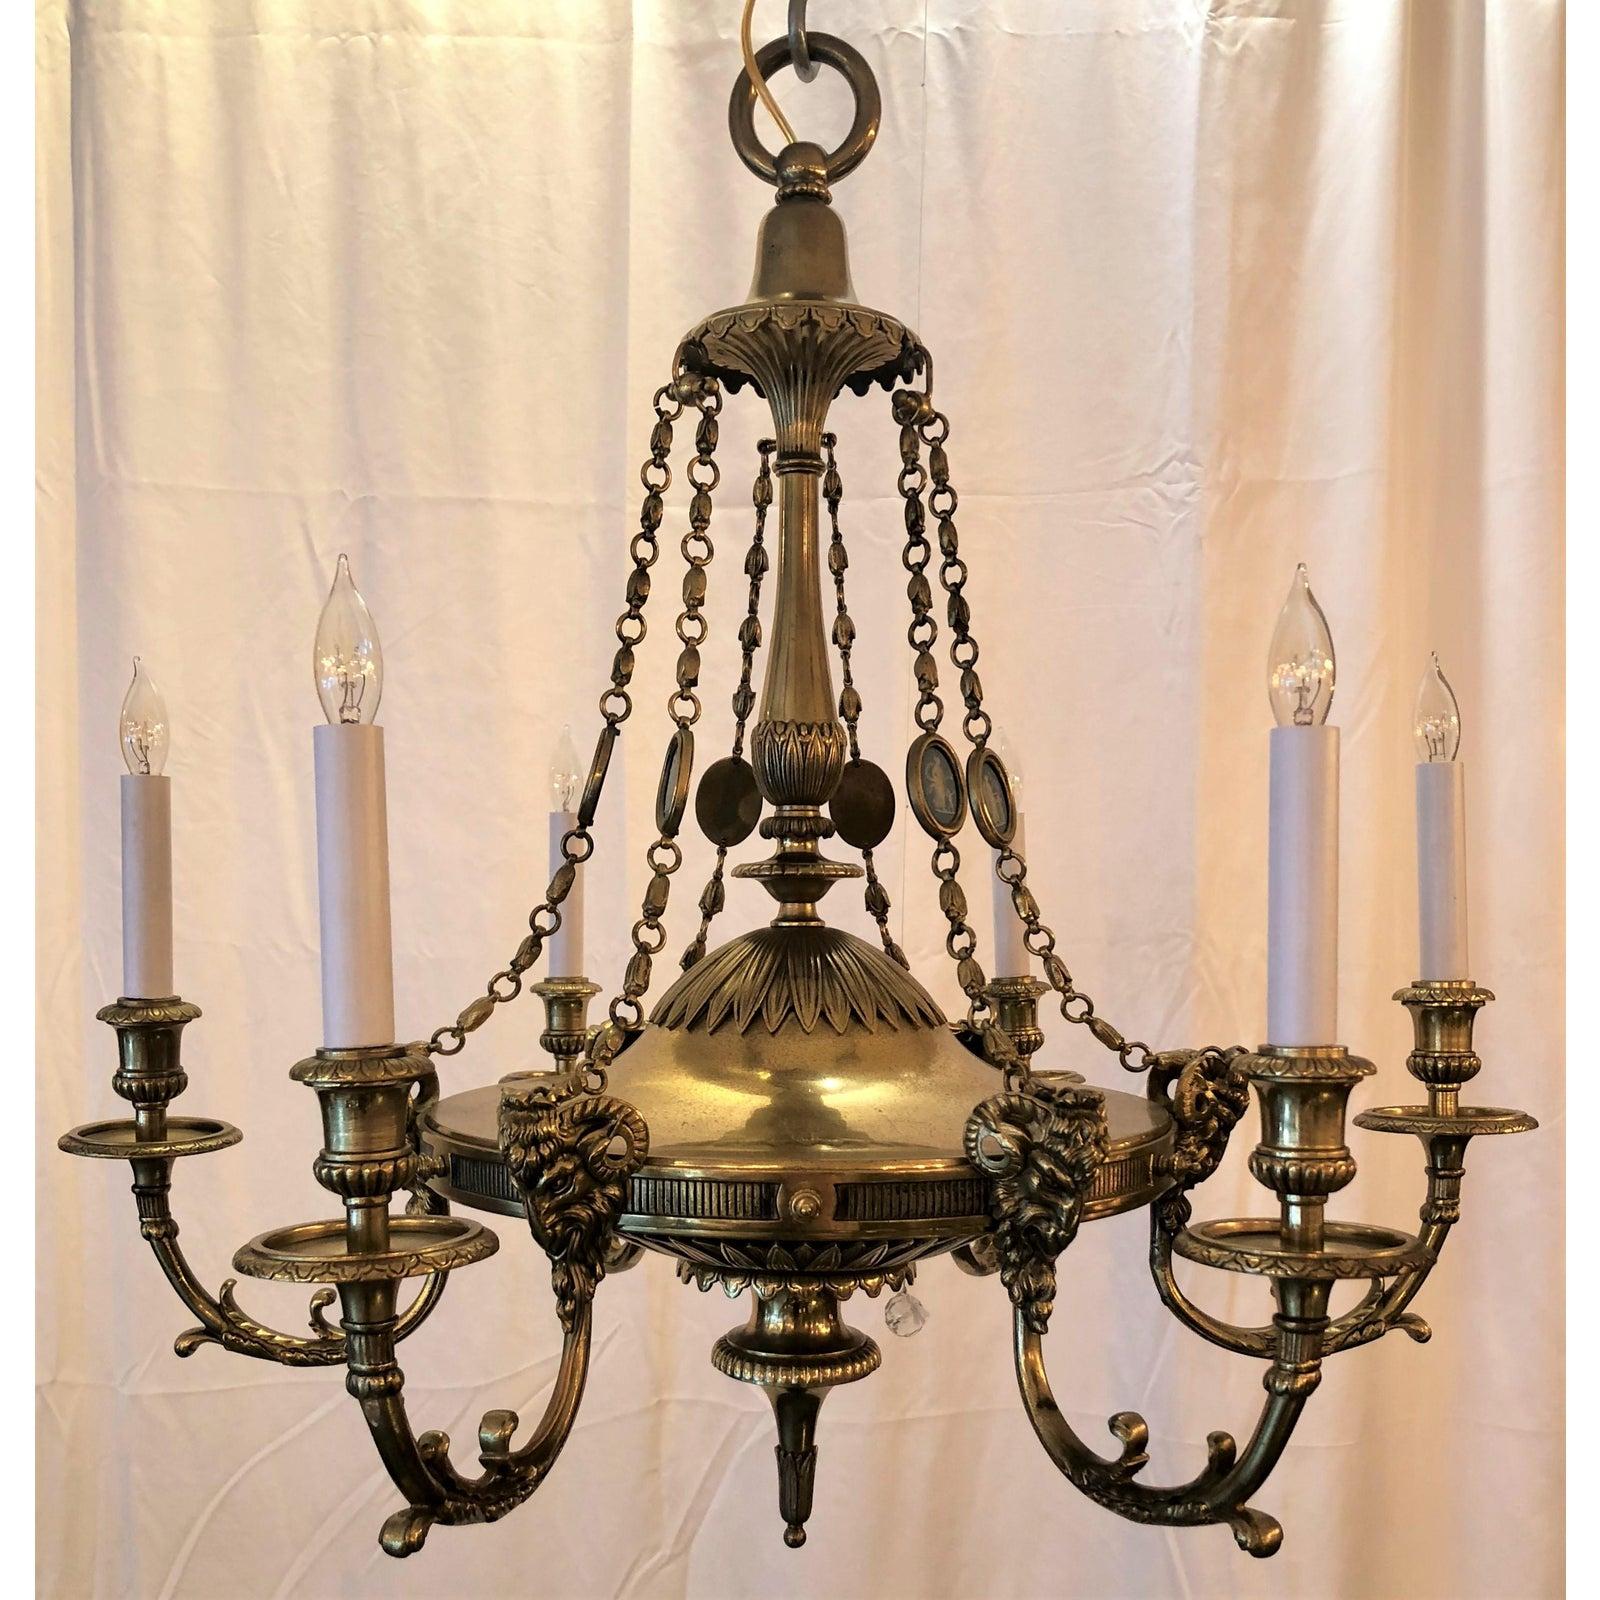 English Adam Design Classic Brass Fixture Chandelier with Wedgwood Insets In Good Condition For Sale In New Orleans, LA